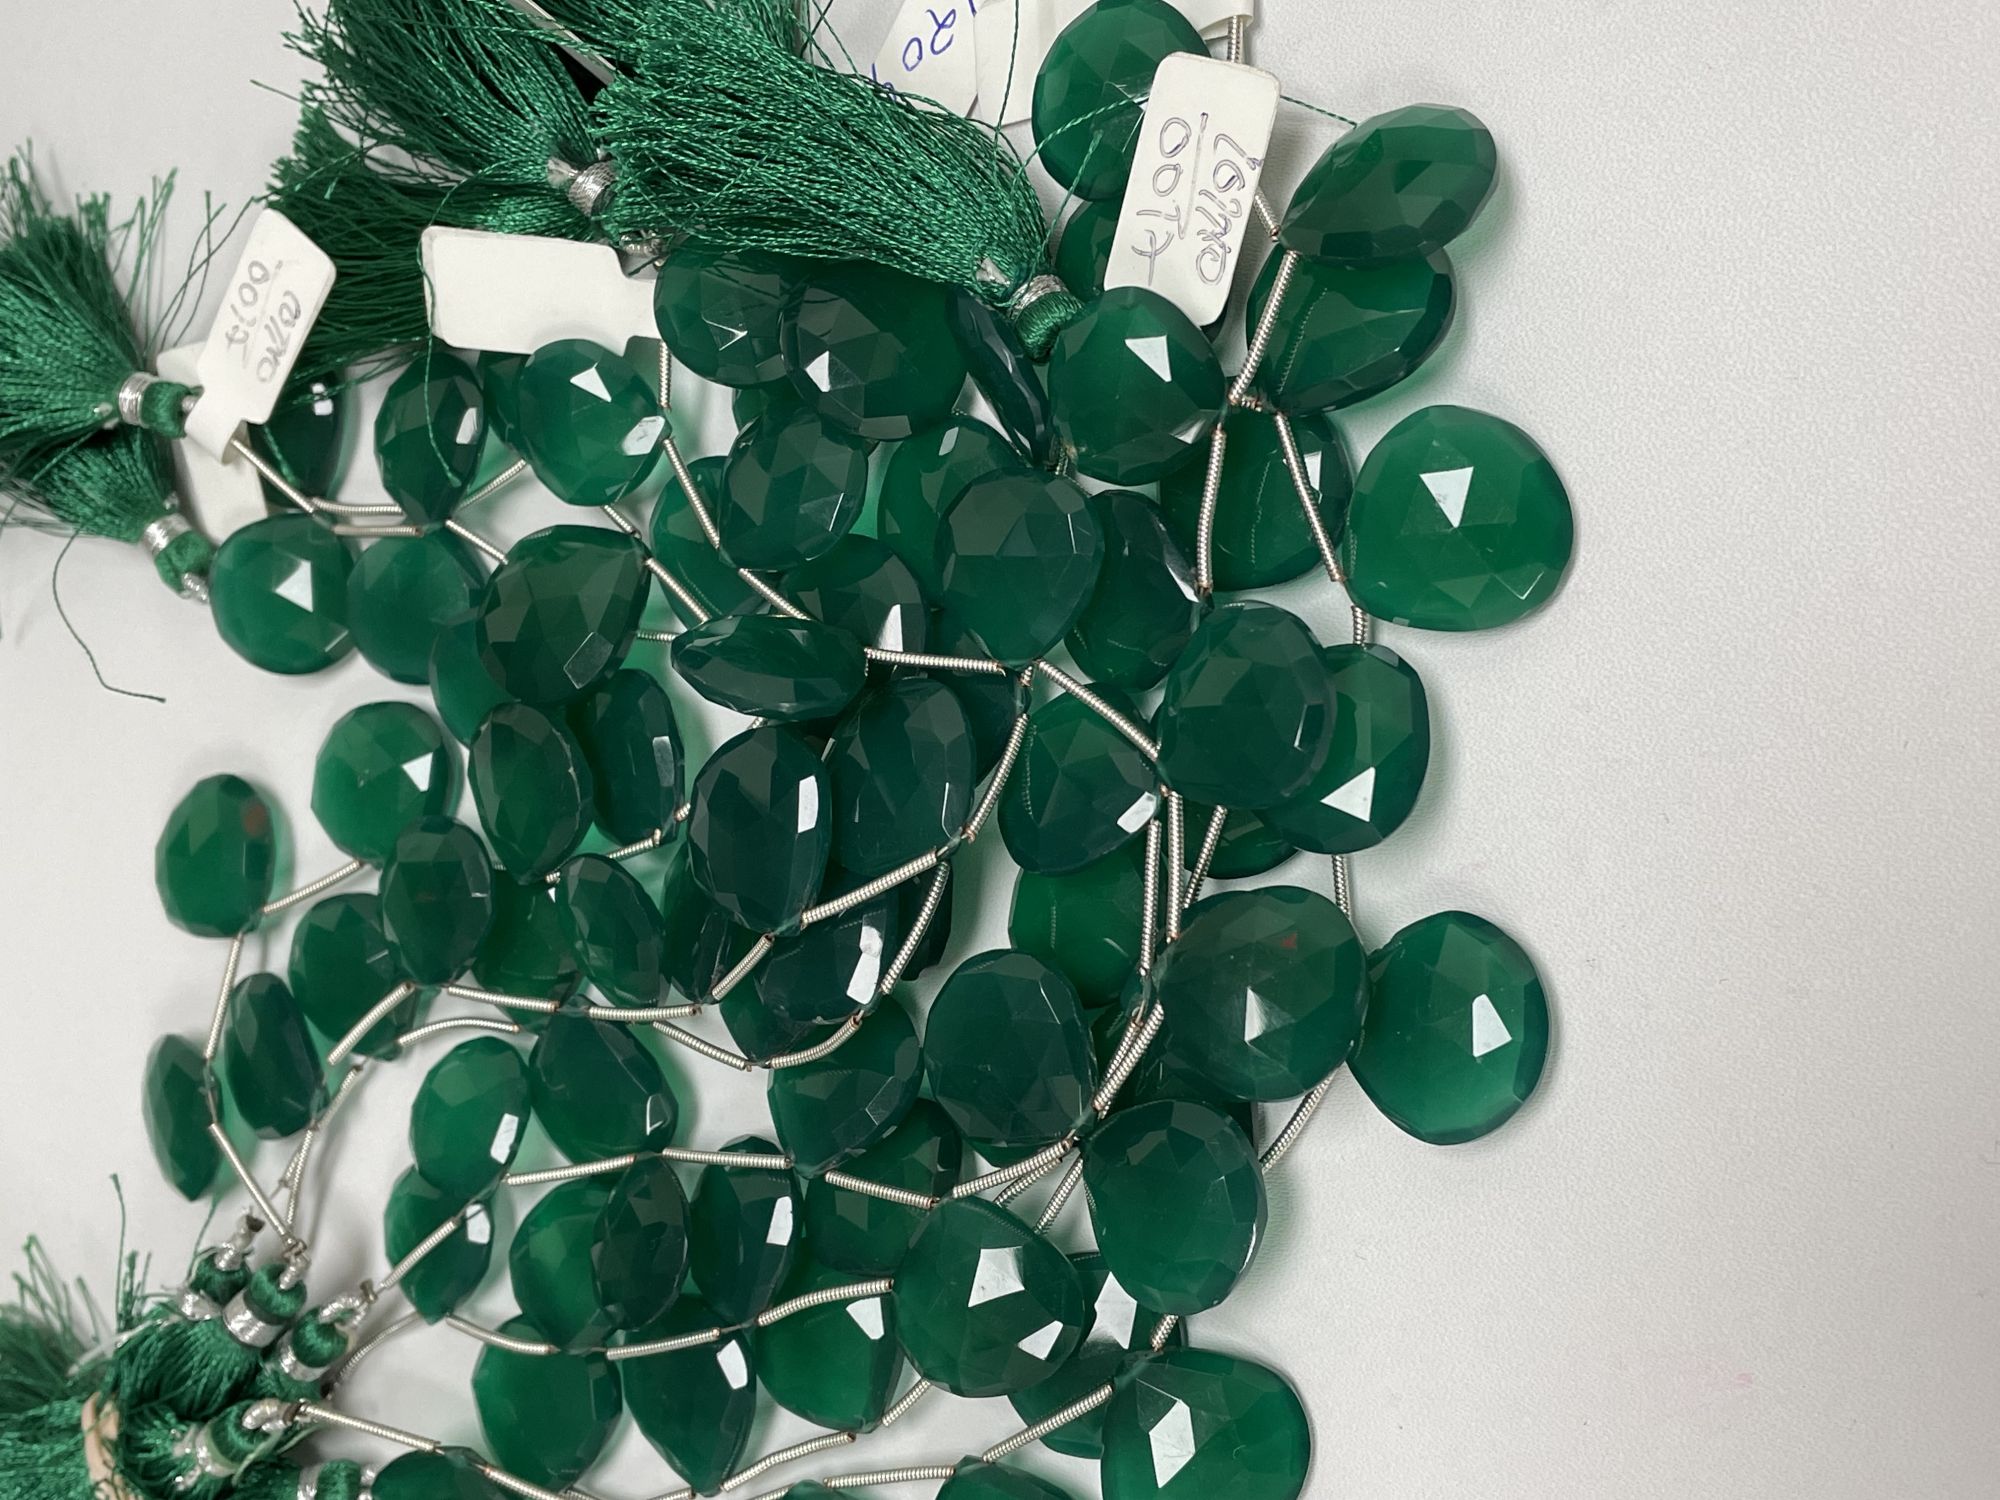 Green Onyx Heart Faceted